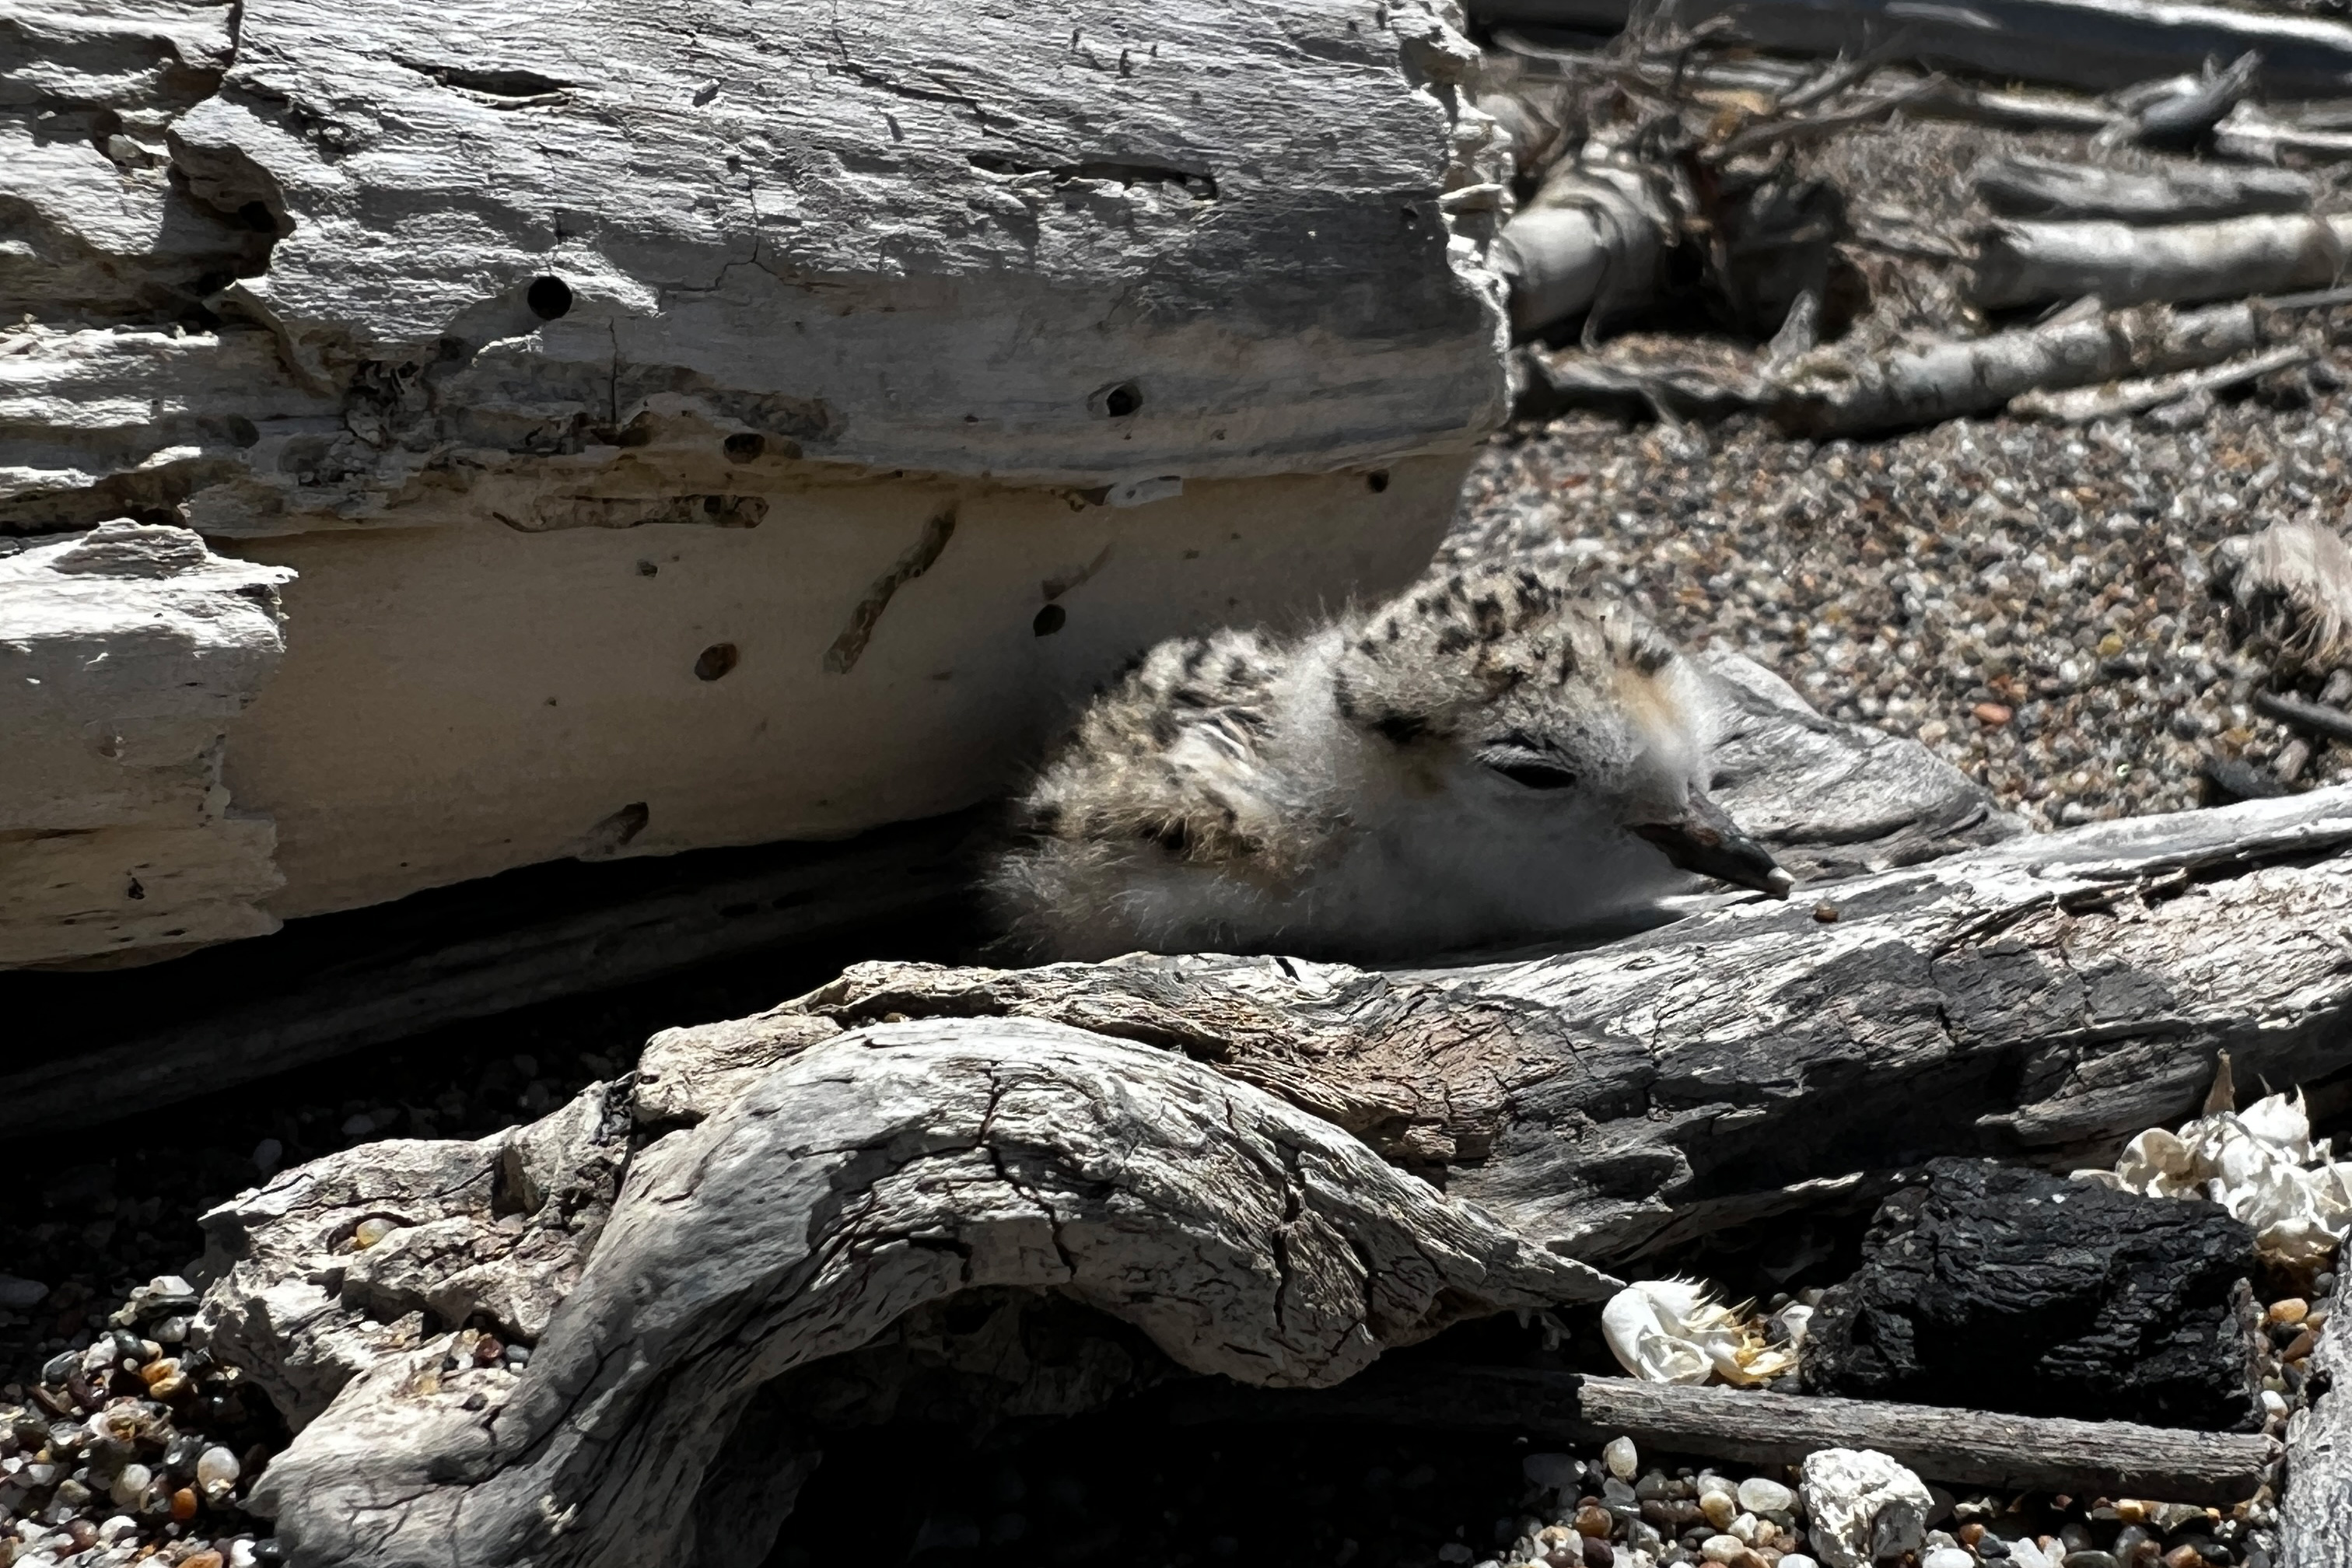 A photo of a small black-speckled, beige-colored shorebird chick lying on sand among pieces of driftwood.